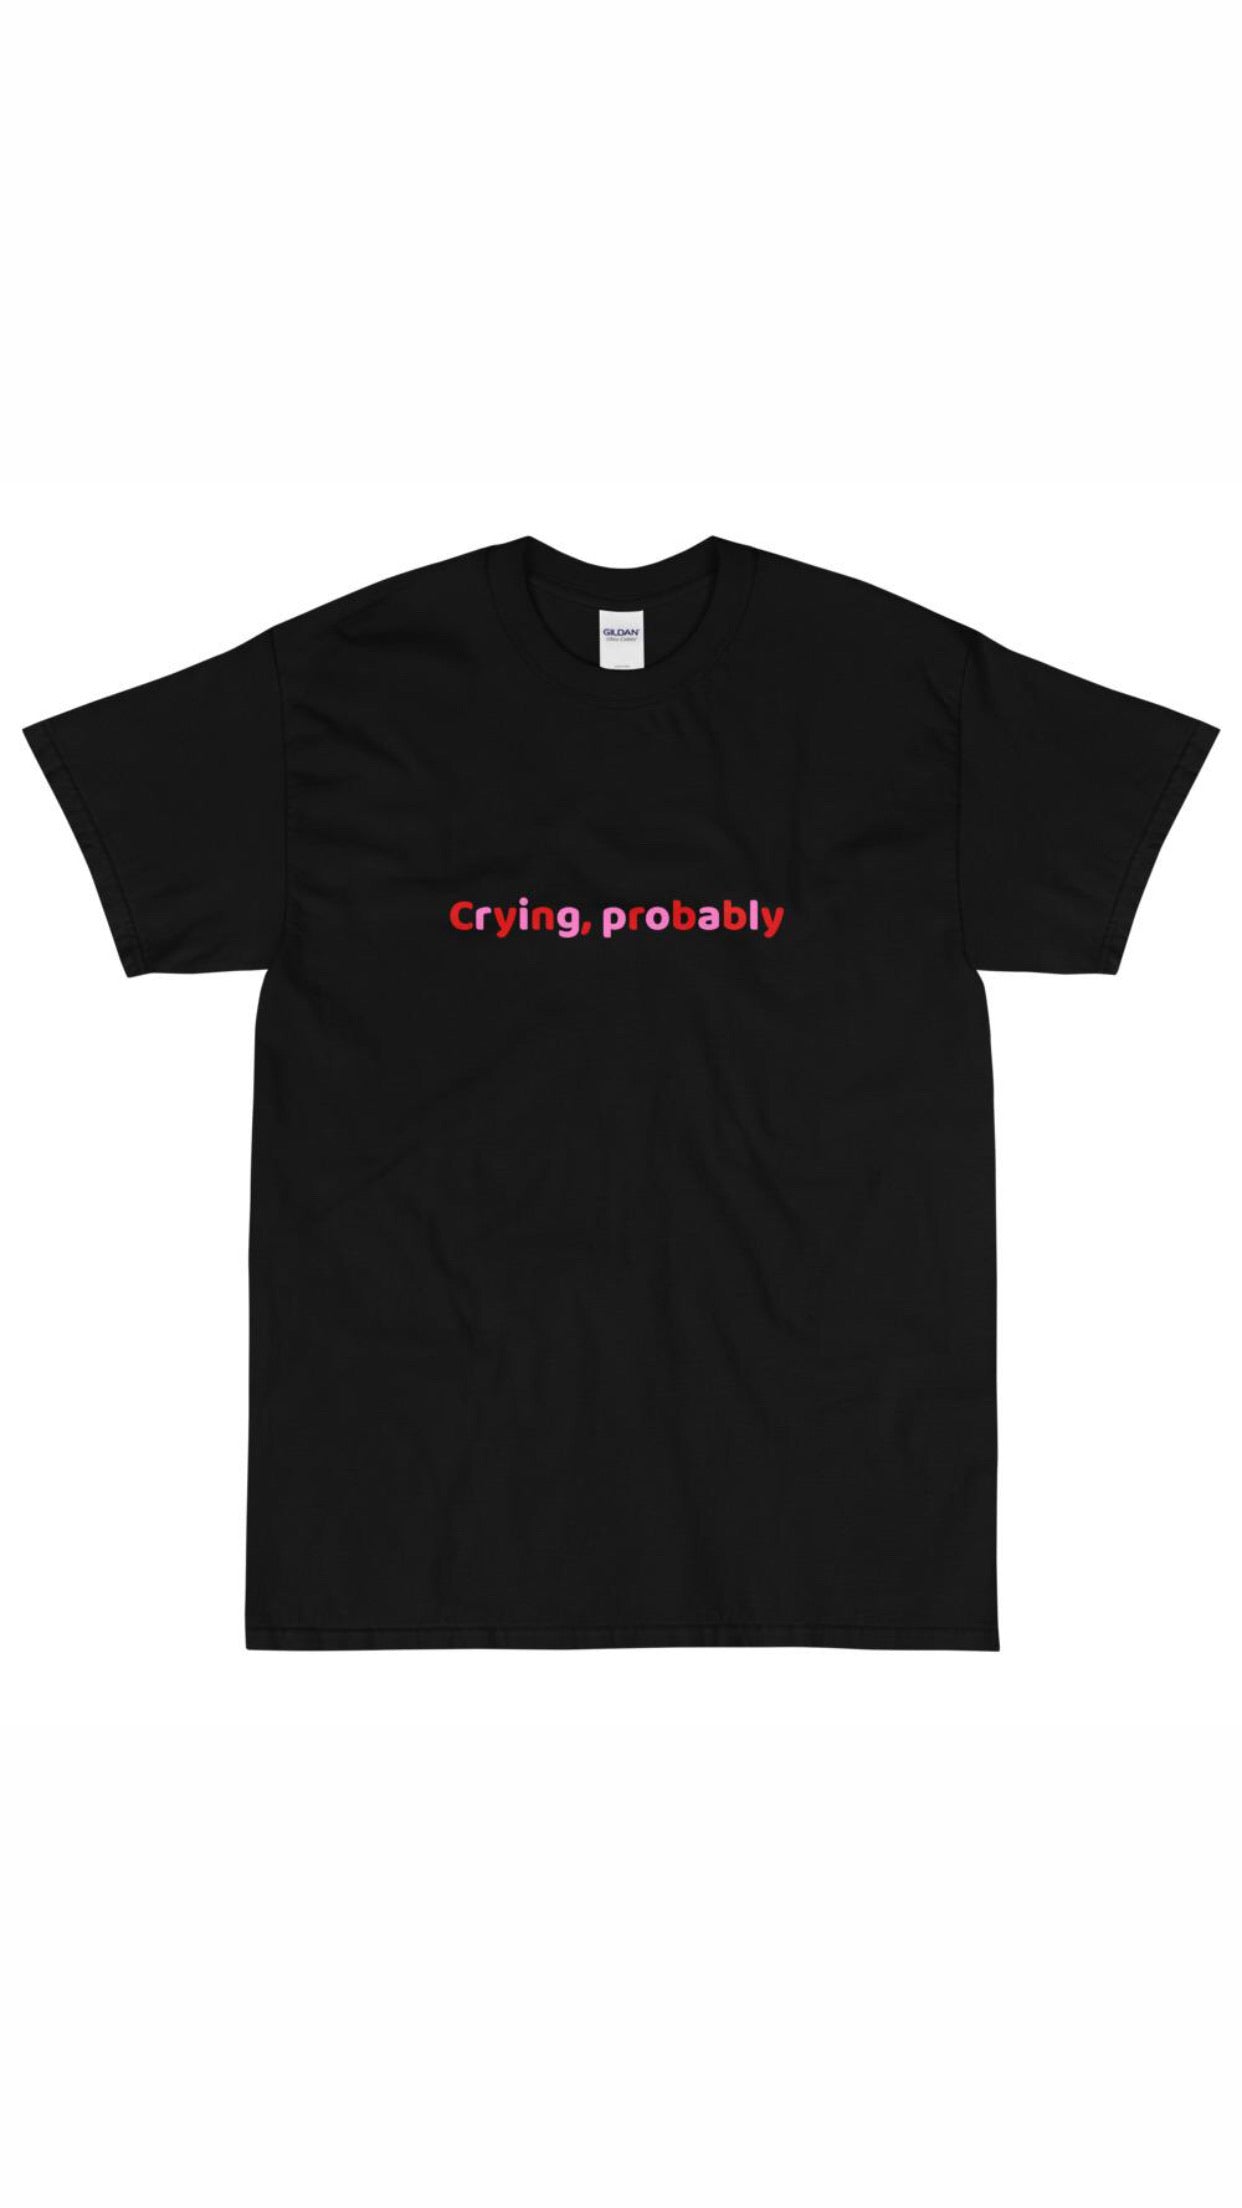 black tee shirt that reads "crying, probably" in alternating red and pink lettering